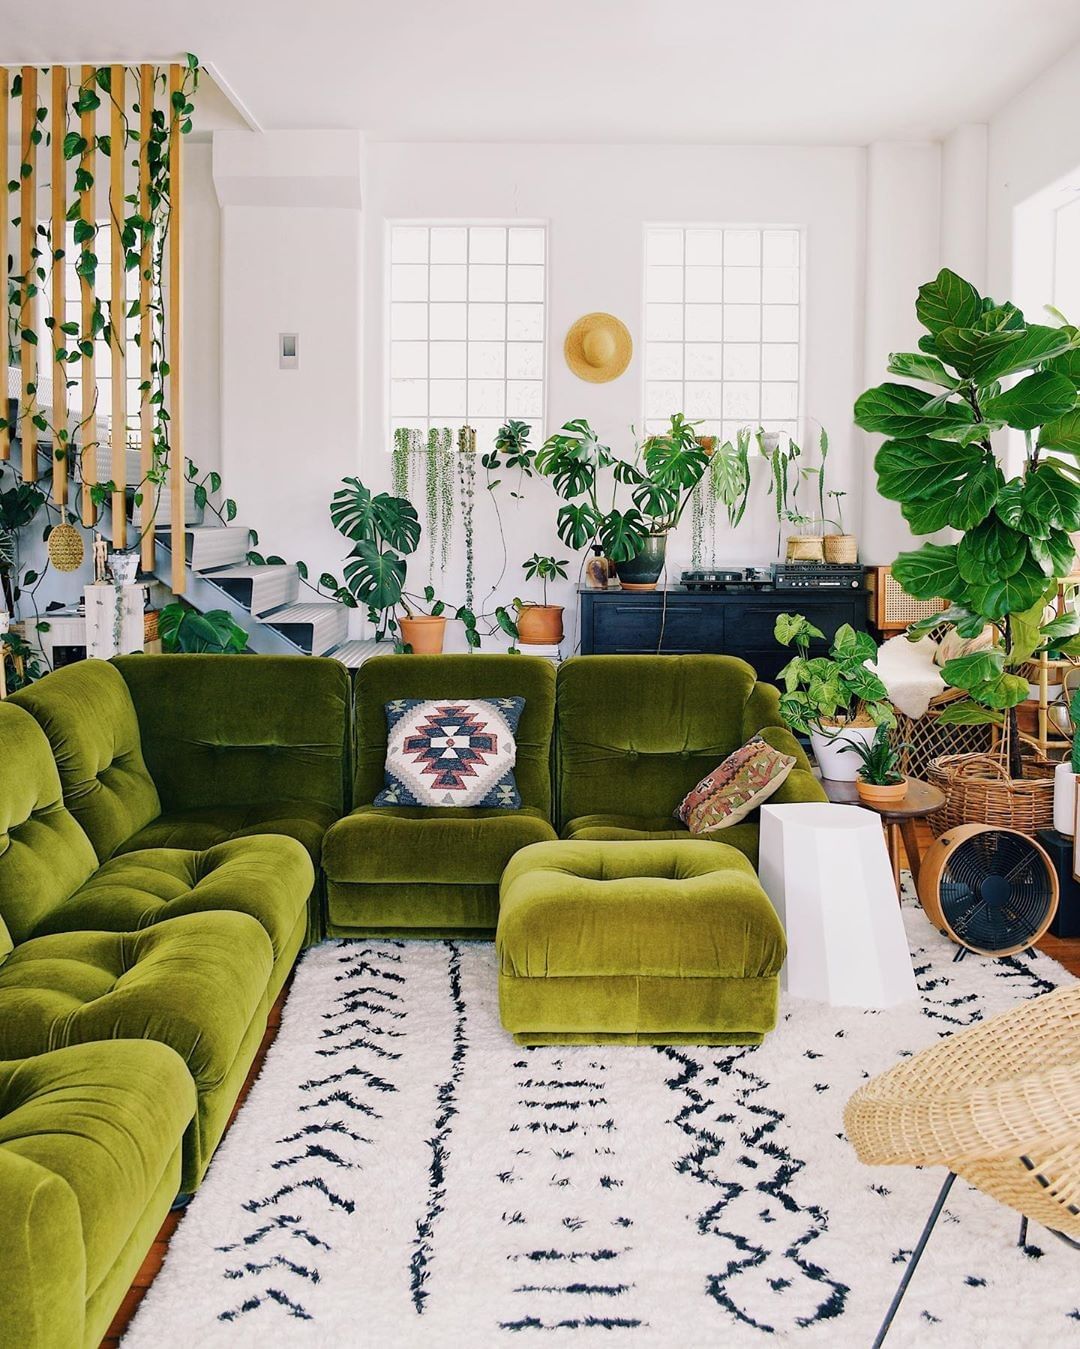 Maximize Greenery and Cosy Textures